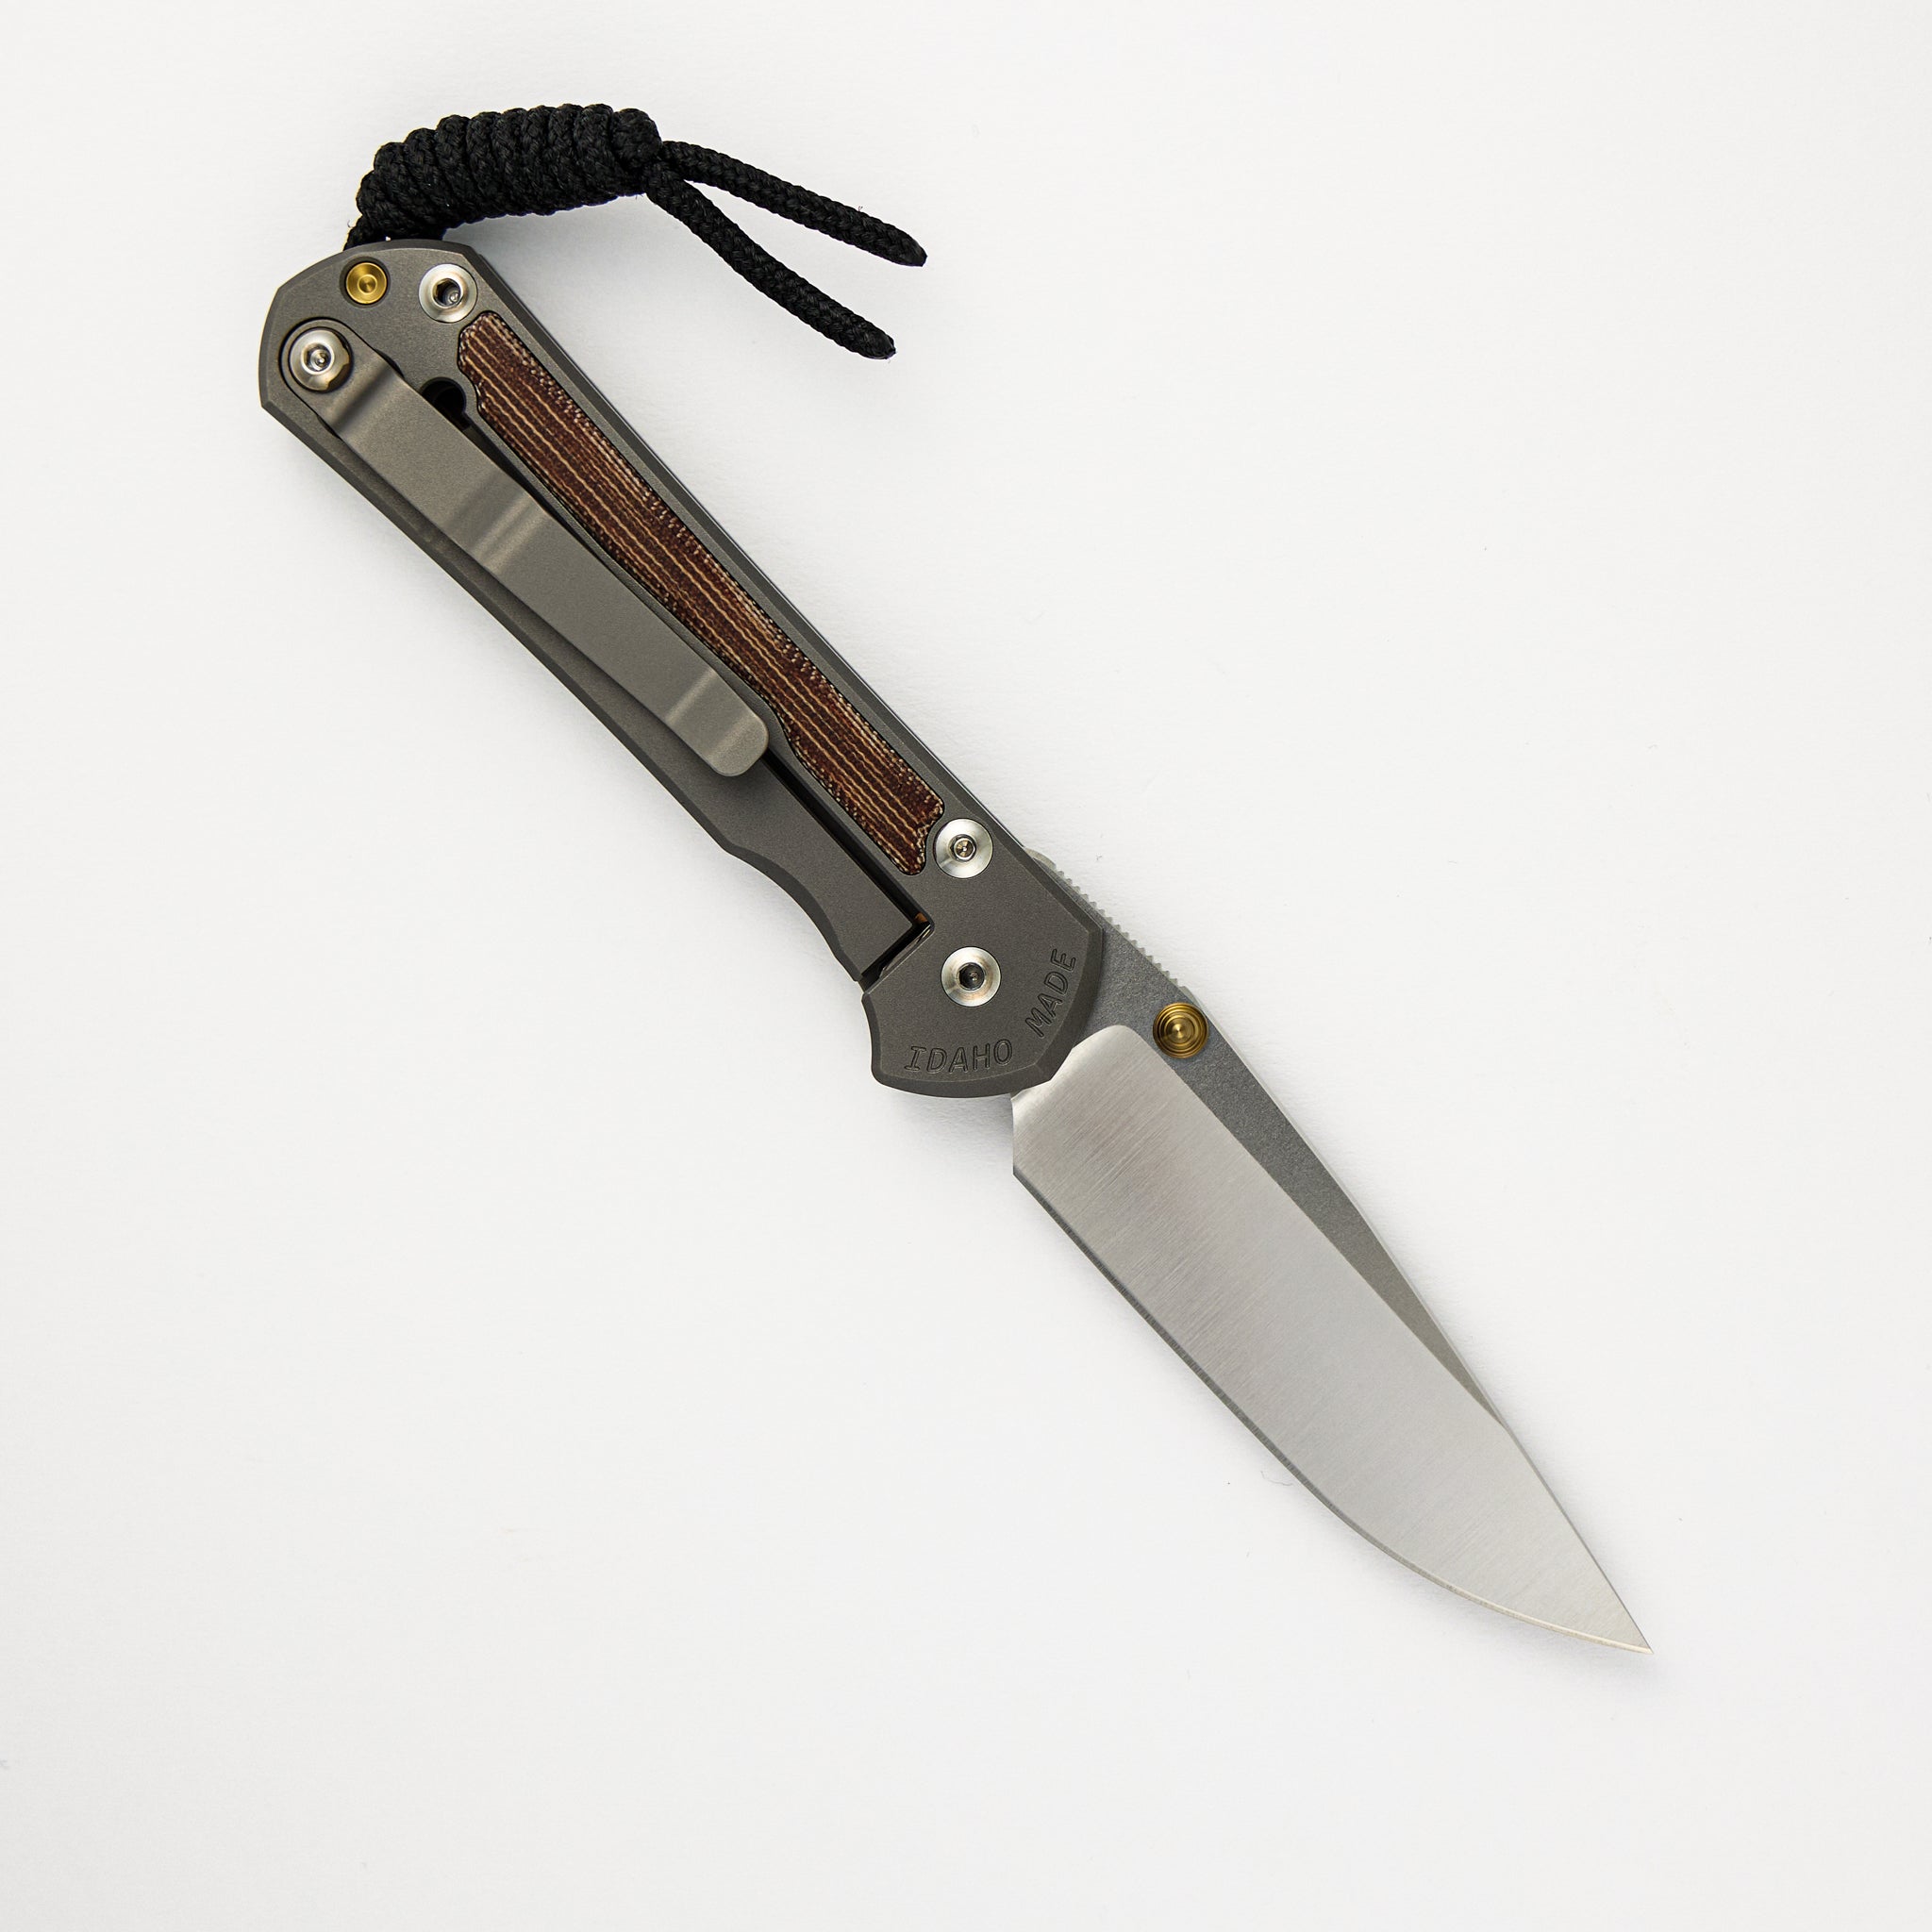 CHRIS REEVE SMALL SEBENZA 31 NATURAL CANVAS MICARTA INLAY – POLISHED CPM MAGNACUT BLADE – GLASS BLASTED – GOLD DOUBLE THUMB LUGS